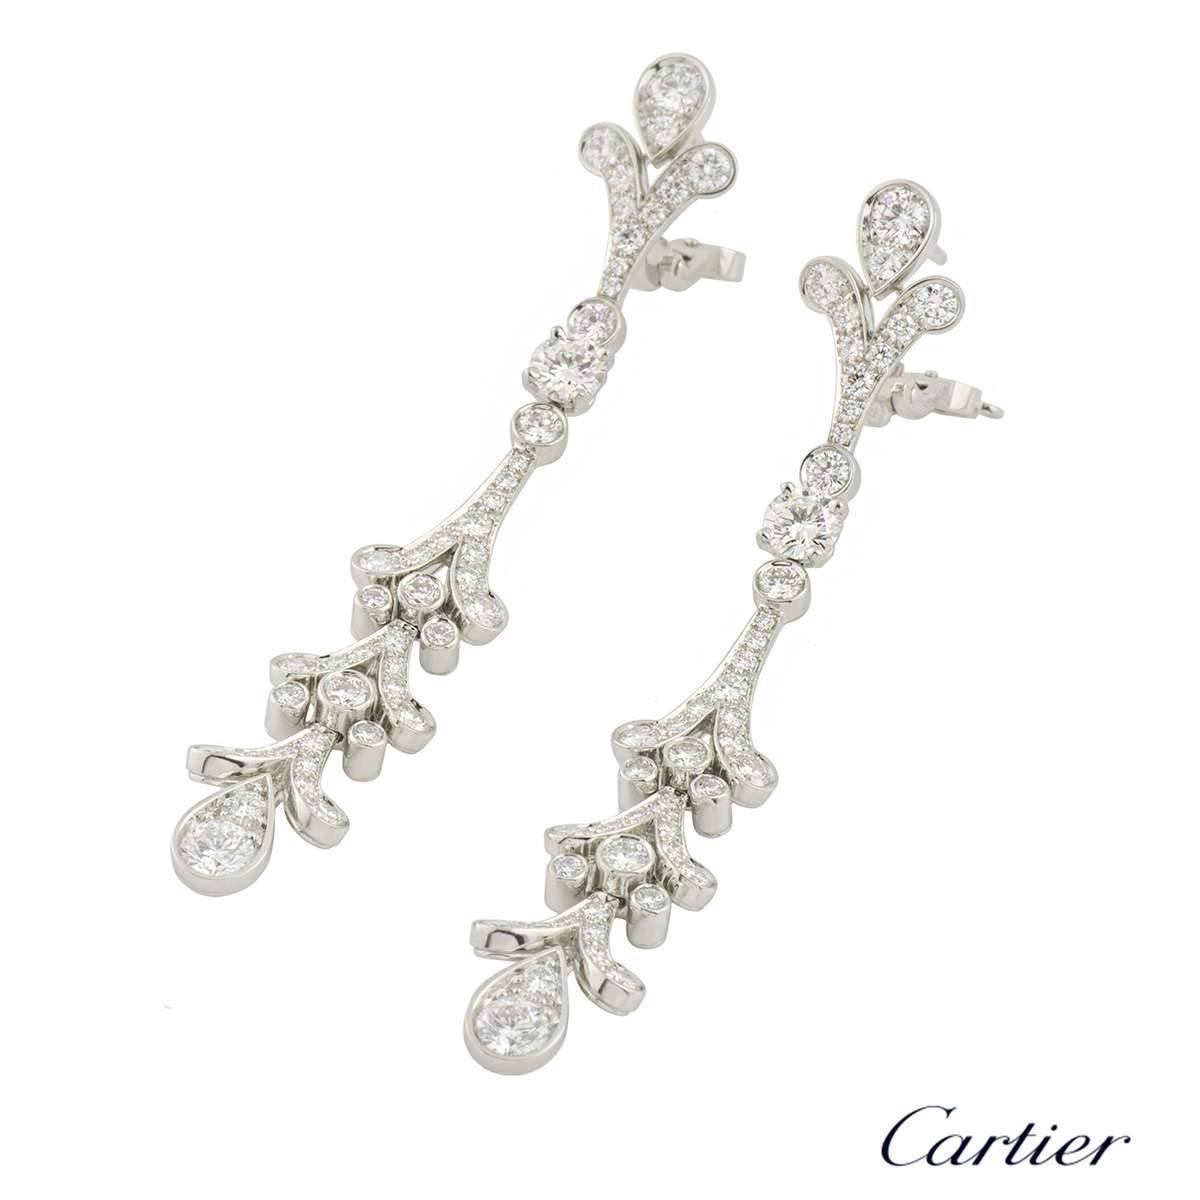 A luxurious pair of platinum diamond Cartier chandelier drop earrings from the Tulipe collection. The earrings are comprised of 72 round brilliant cut diamonds set in a rubover and pave setting. The diamonds have a total weight of approximately